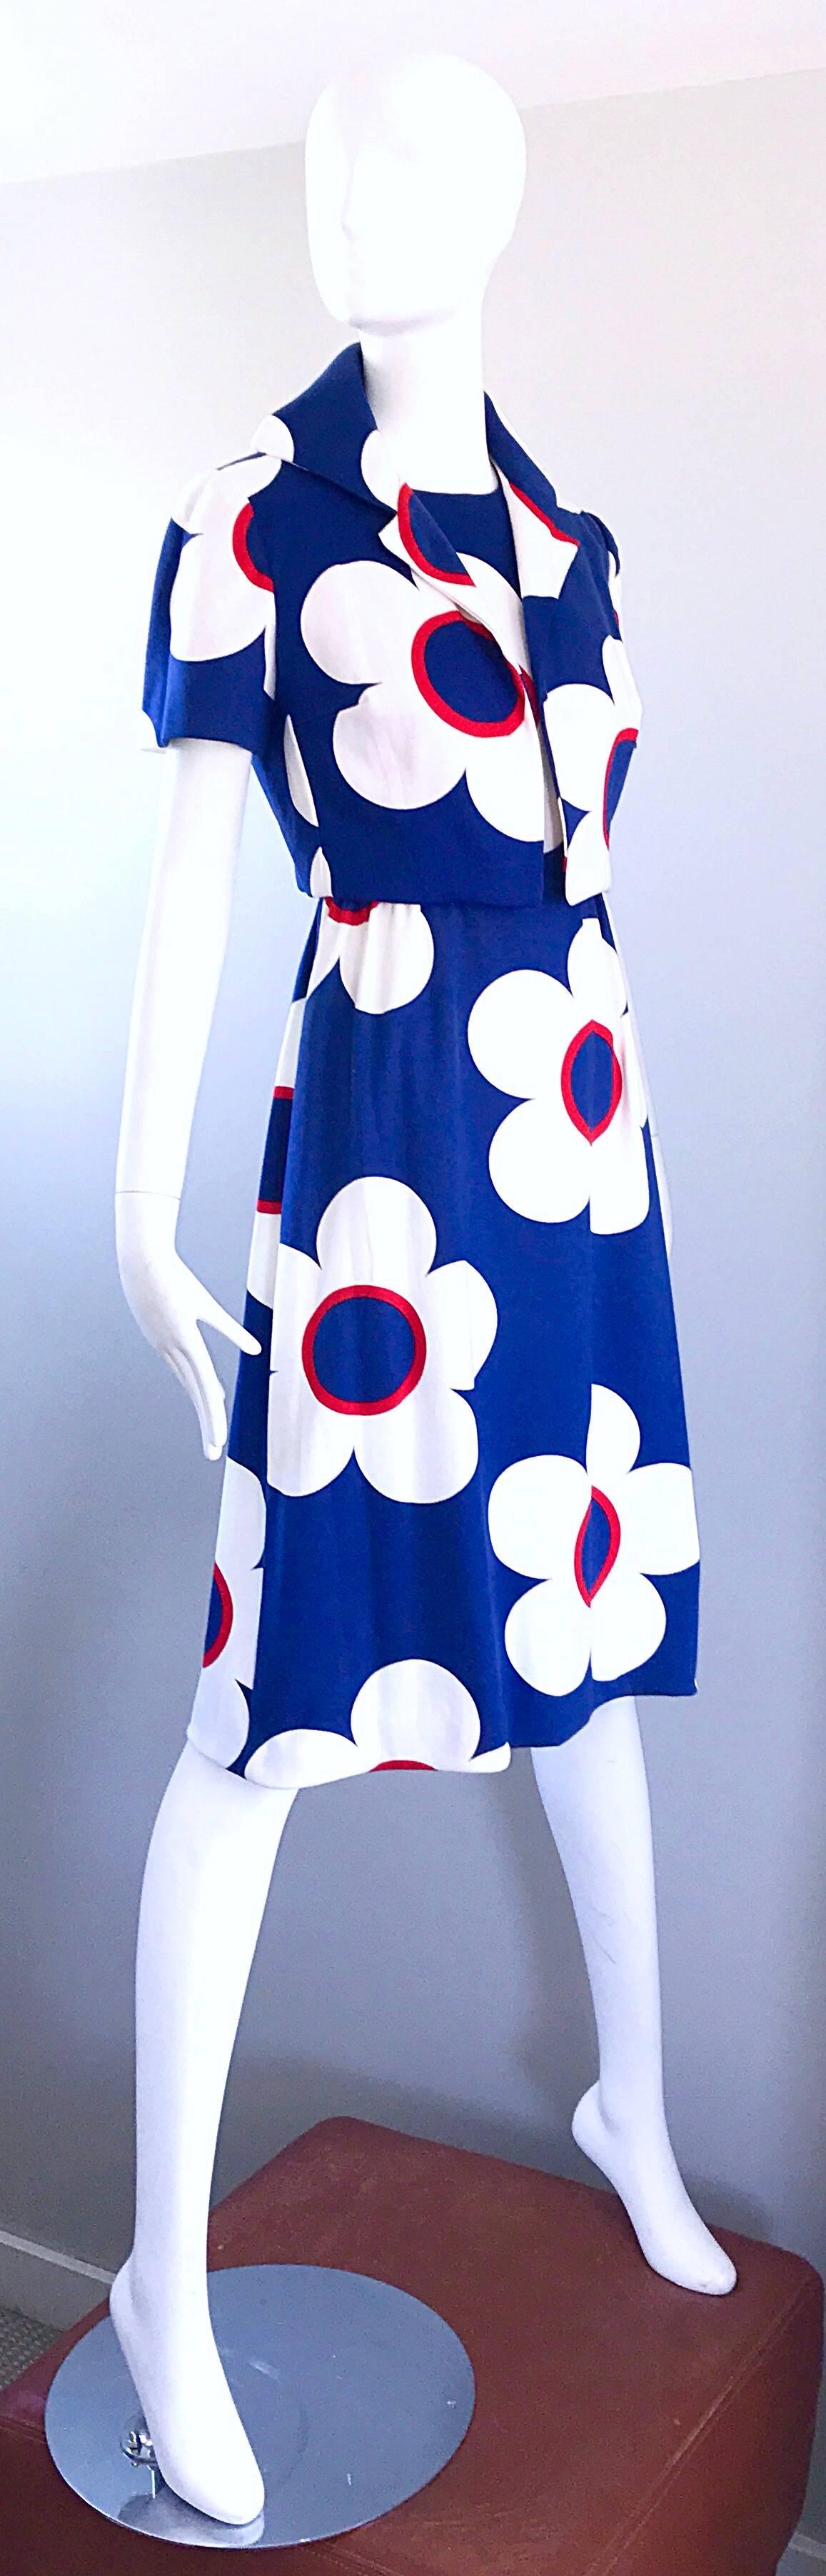 Gray Phenomenal 1960s Navy Blue + Red + White A - Line Dress & Cropped Bolero Jacket For Sale